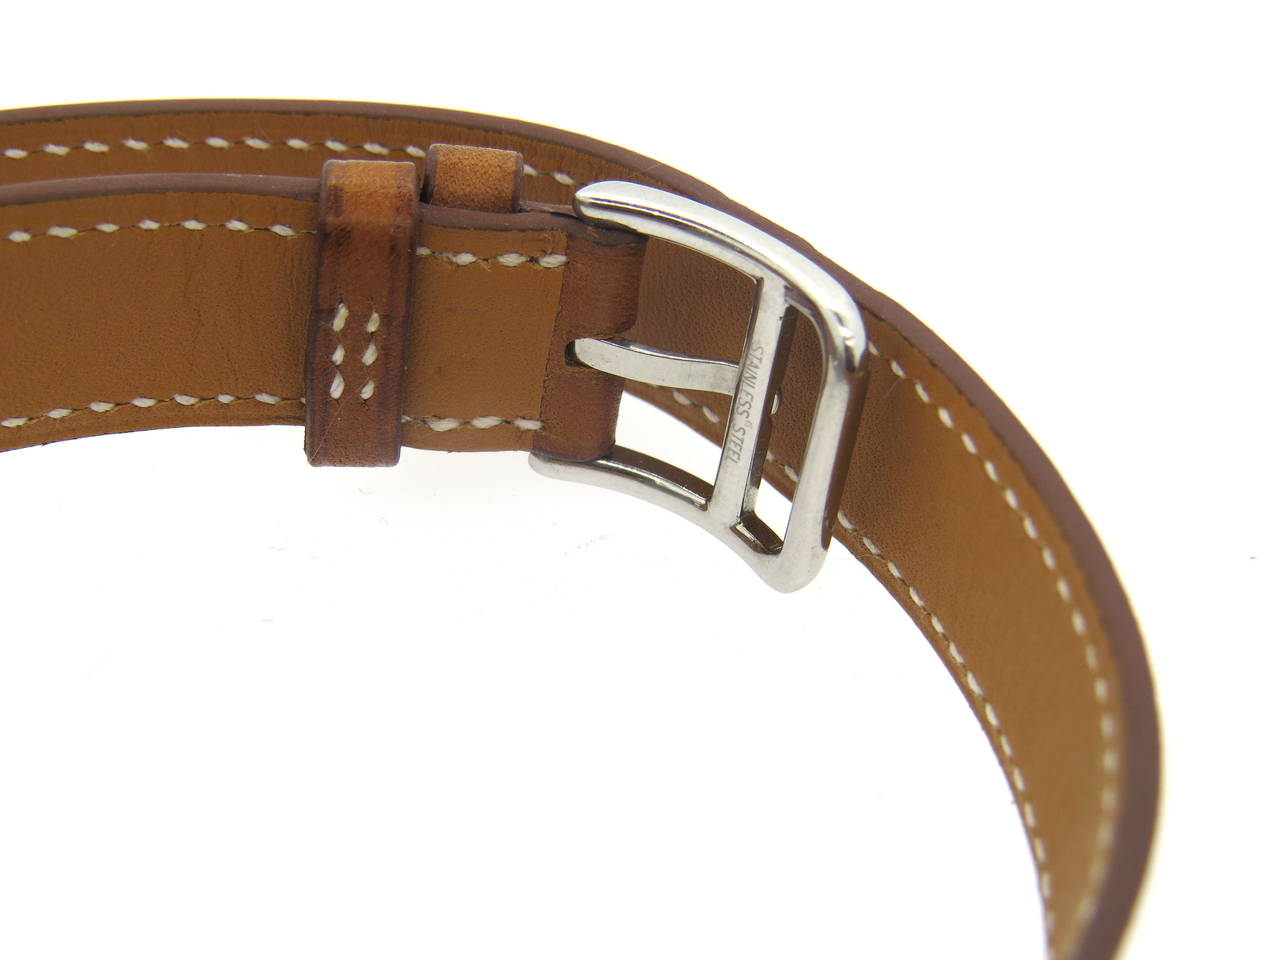 Stainless steel tonneau shape watch, crafted by Hermes for Cape Cod collection with classic wrap around brown leather bracelet (comes with an extra new one) Case measures 33mm excl crown x 42mm lug tip to lug tip.  Ref. CT1.710. Quartz battery